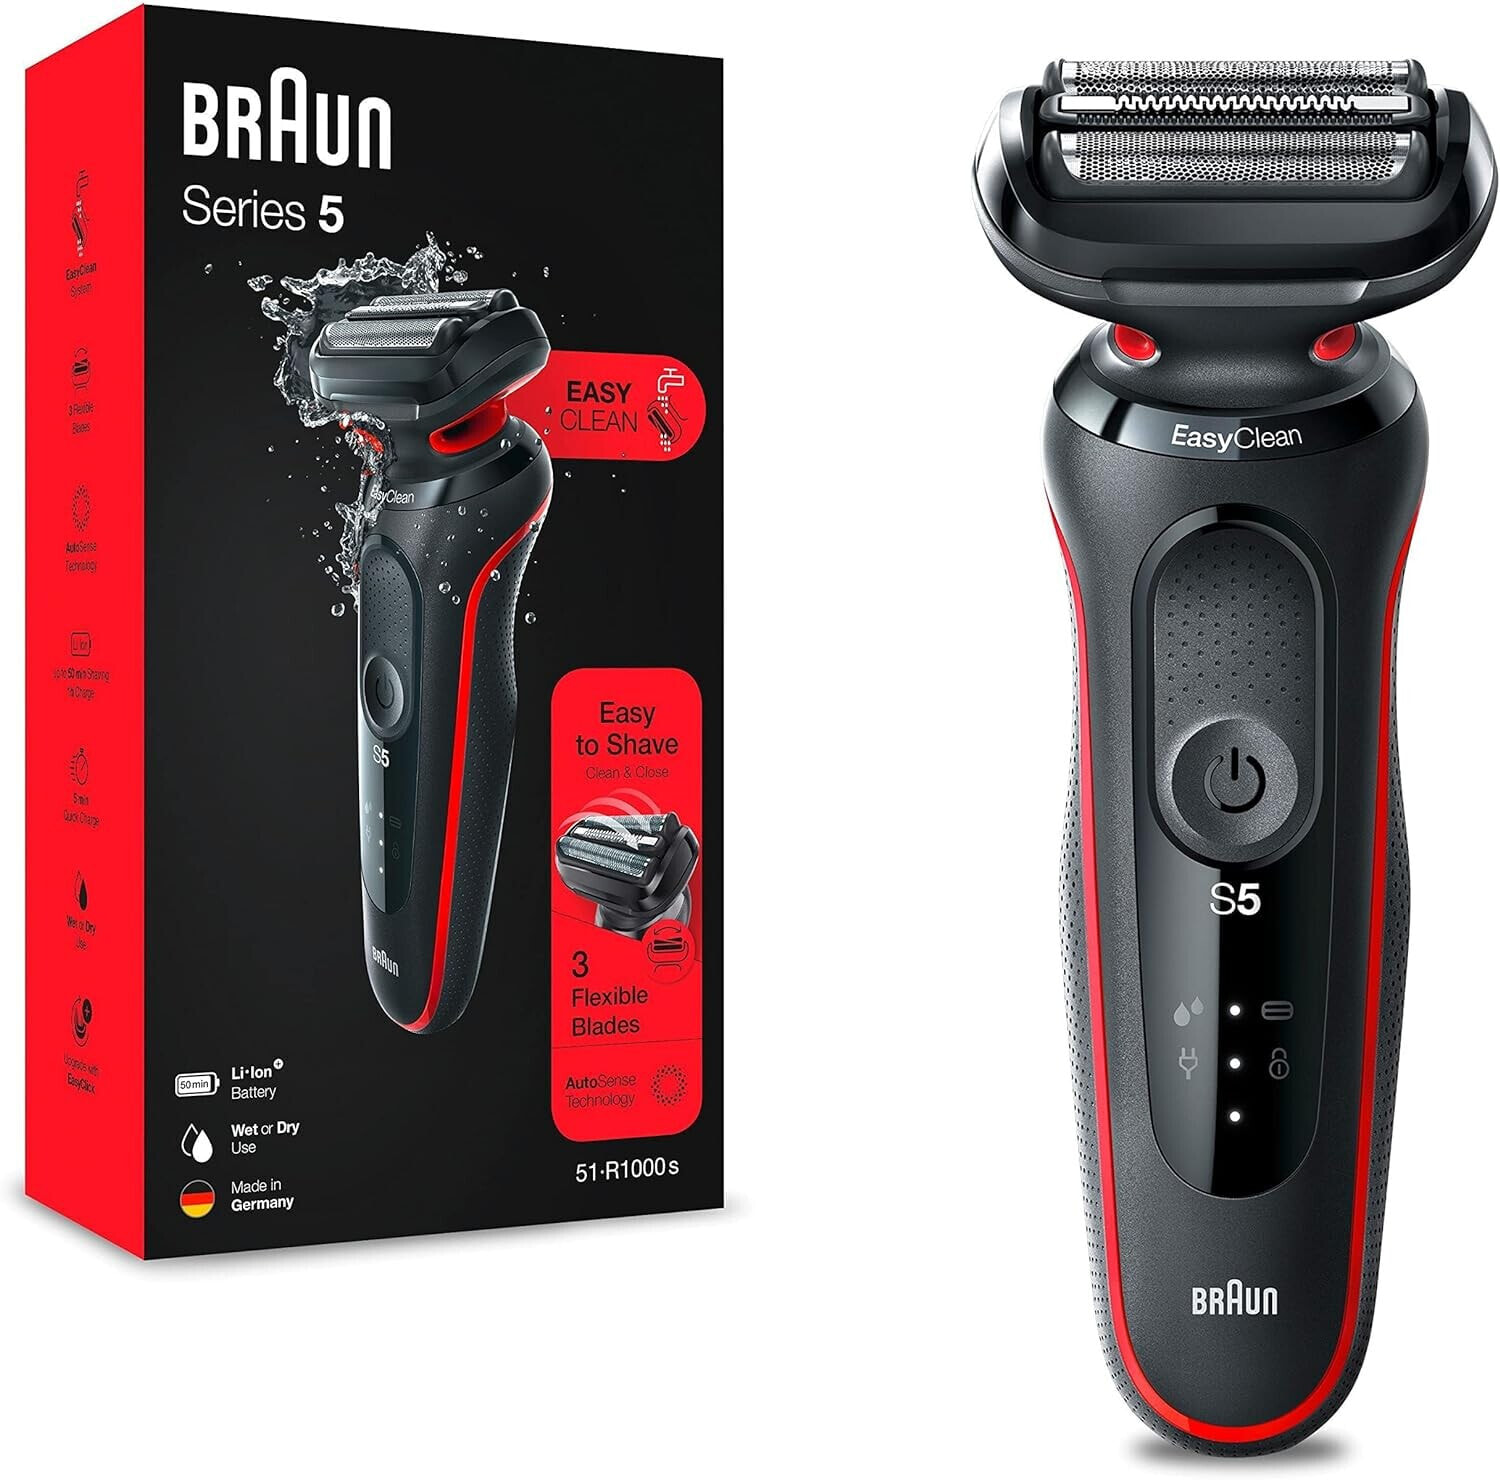 Braun Series 5 Men's Electric Shaver, EasyClean, Wet & Dry, Rechargeable & Wireless, Father's Day Gift, 51-R1000s, Red